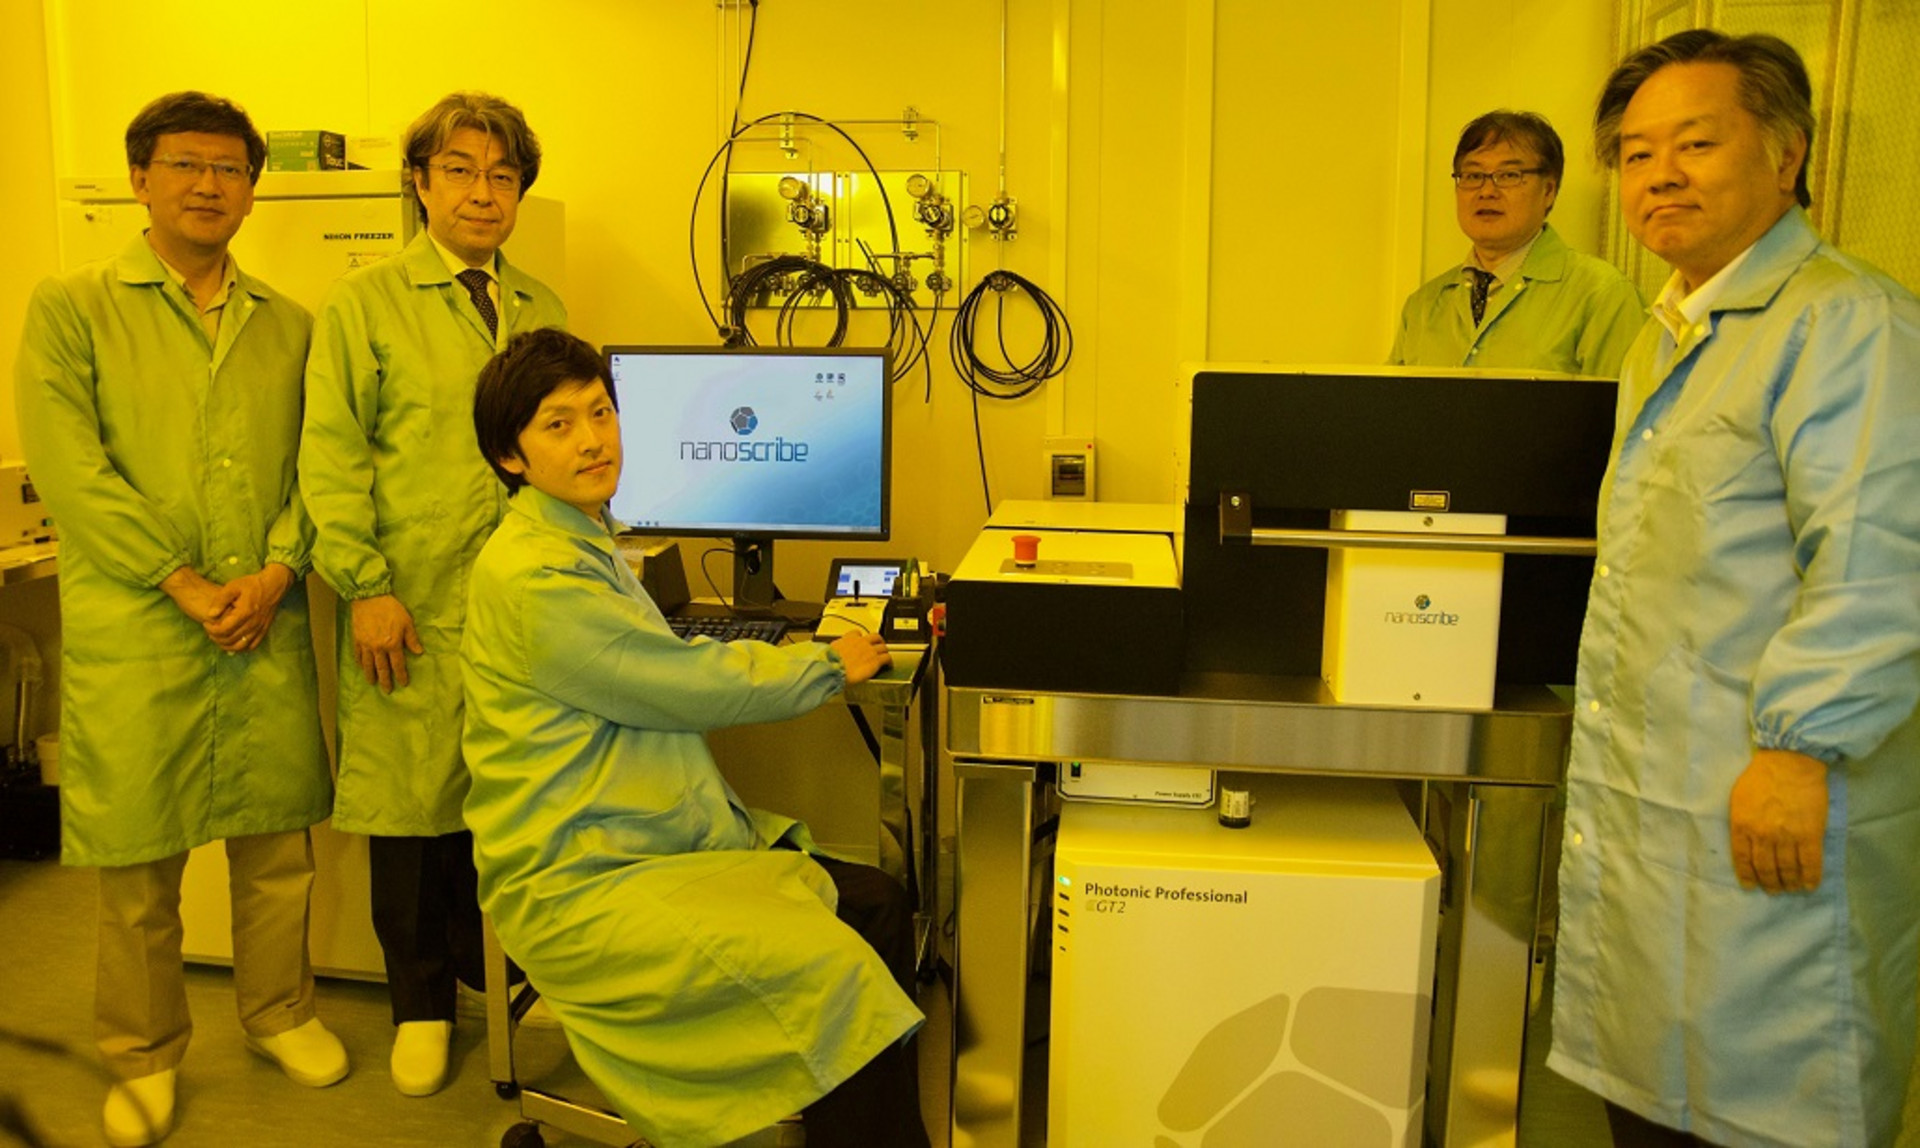 Researchers at Keio University standing at a Nanoscribe Photonic Professional GT2 system